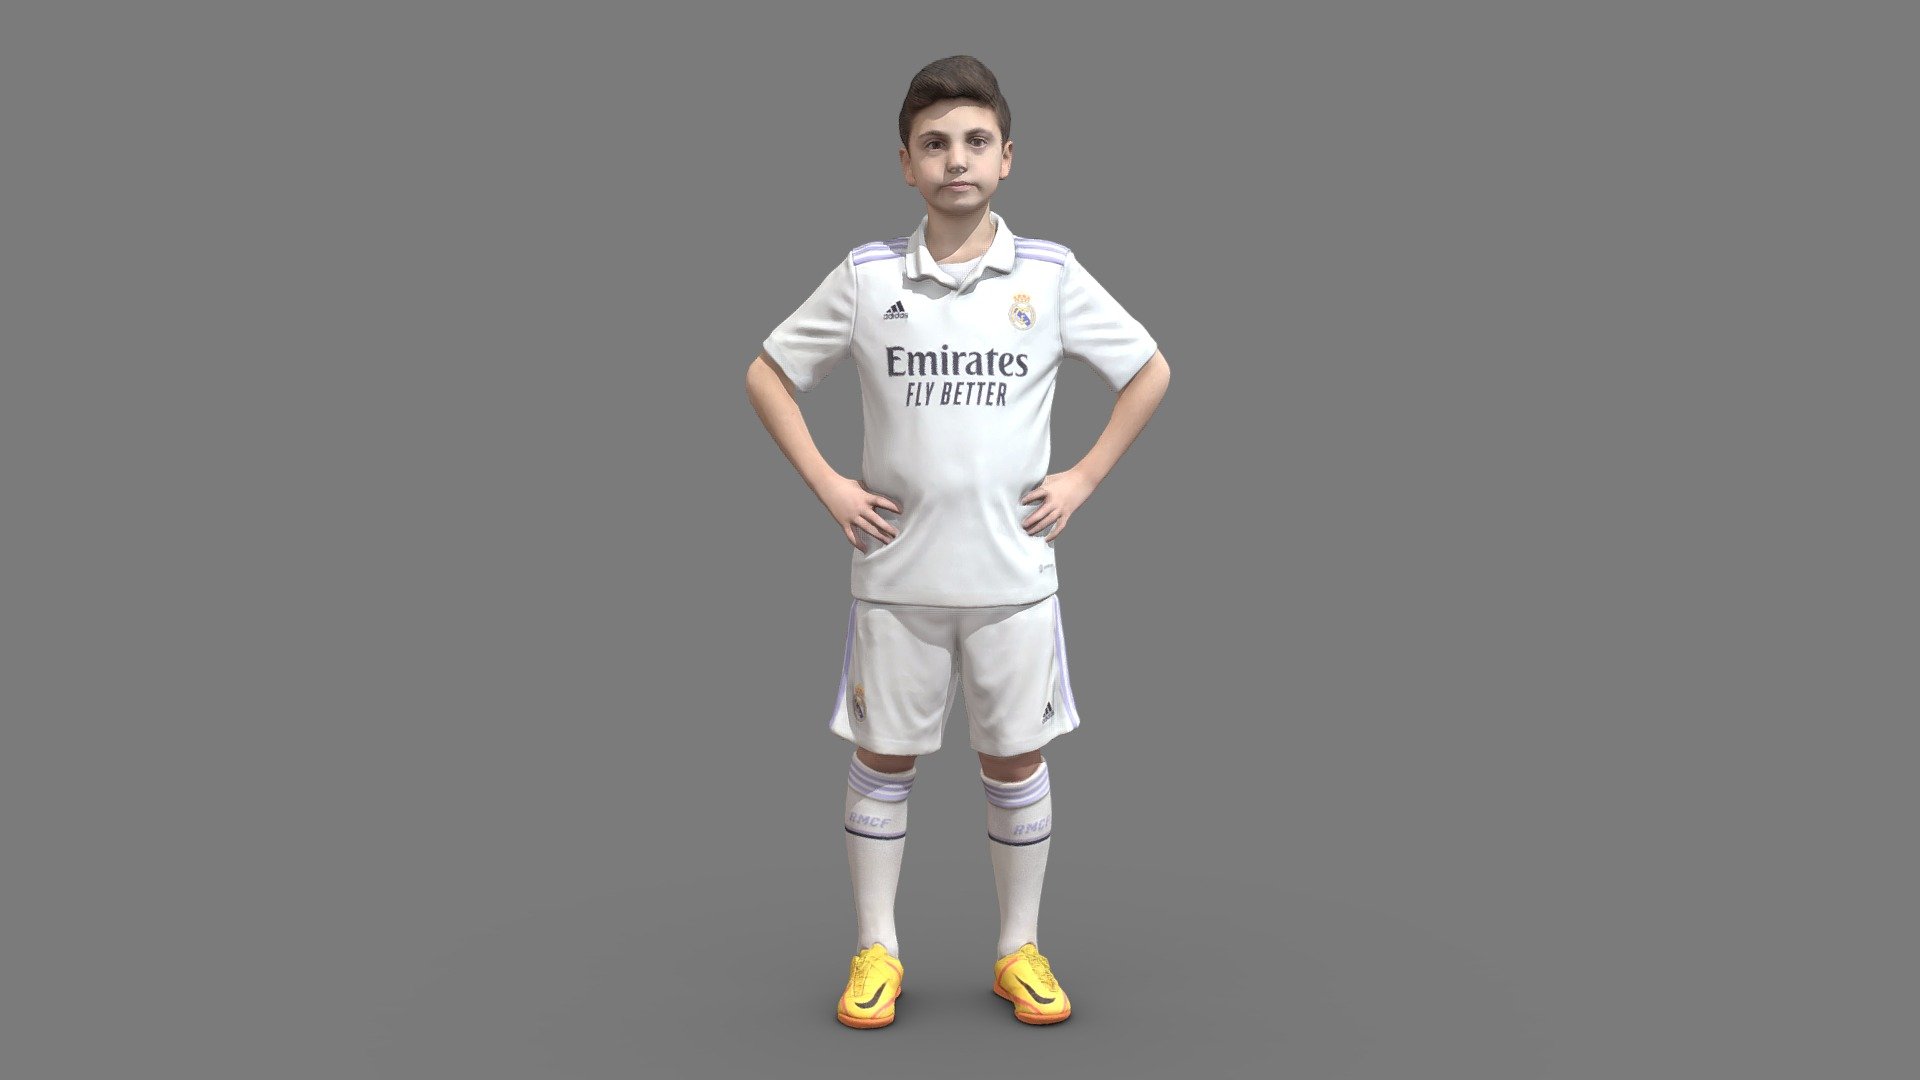 &ldquo;We present the 3D modeling of the boy who is a fan of Real Madrid. We captured the passion and excitement of this young fan through every detail in his 3D figure. Our team of professional designers has worked tirelessly to offer you a sculpture of high quality and precision. Buy this model now to complement your collection of 3D characters and show your support for Real Madrid.